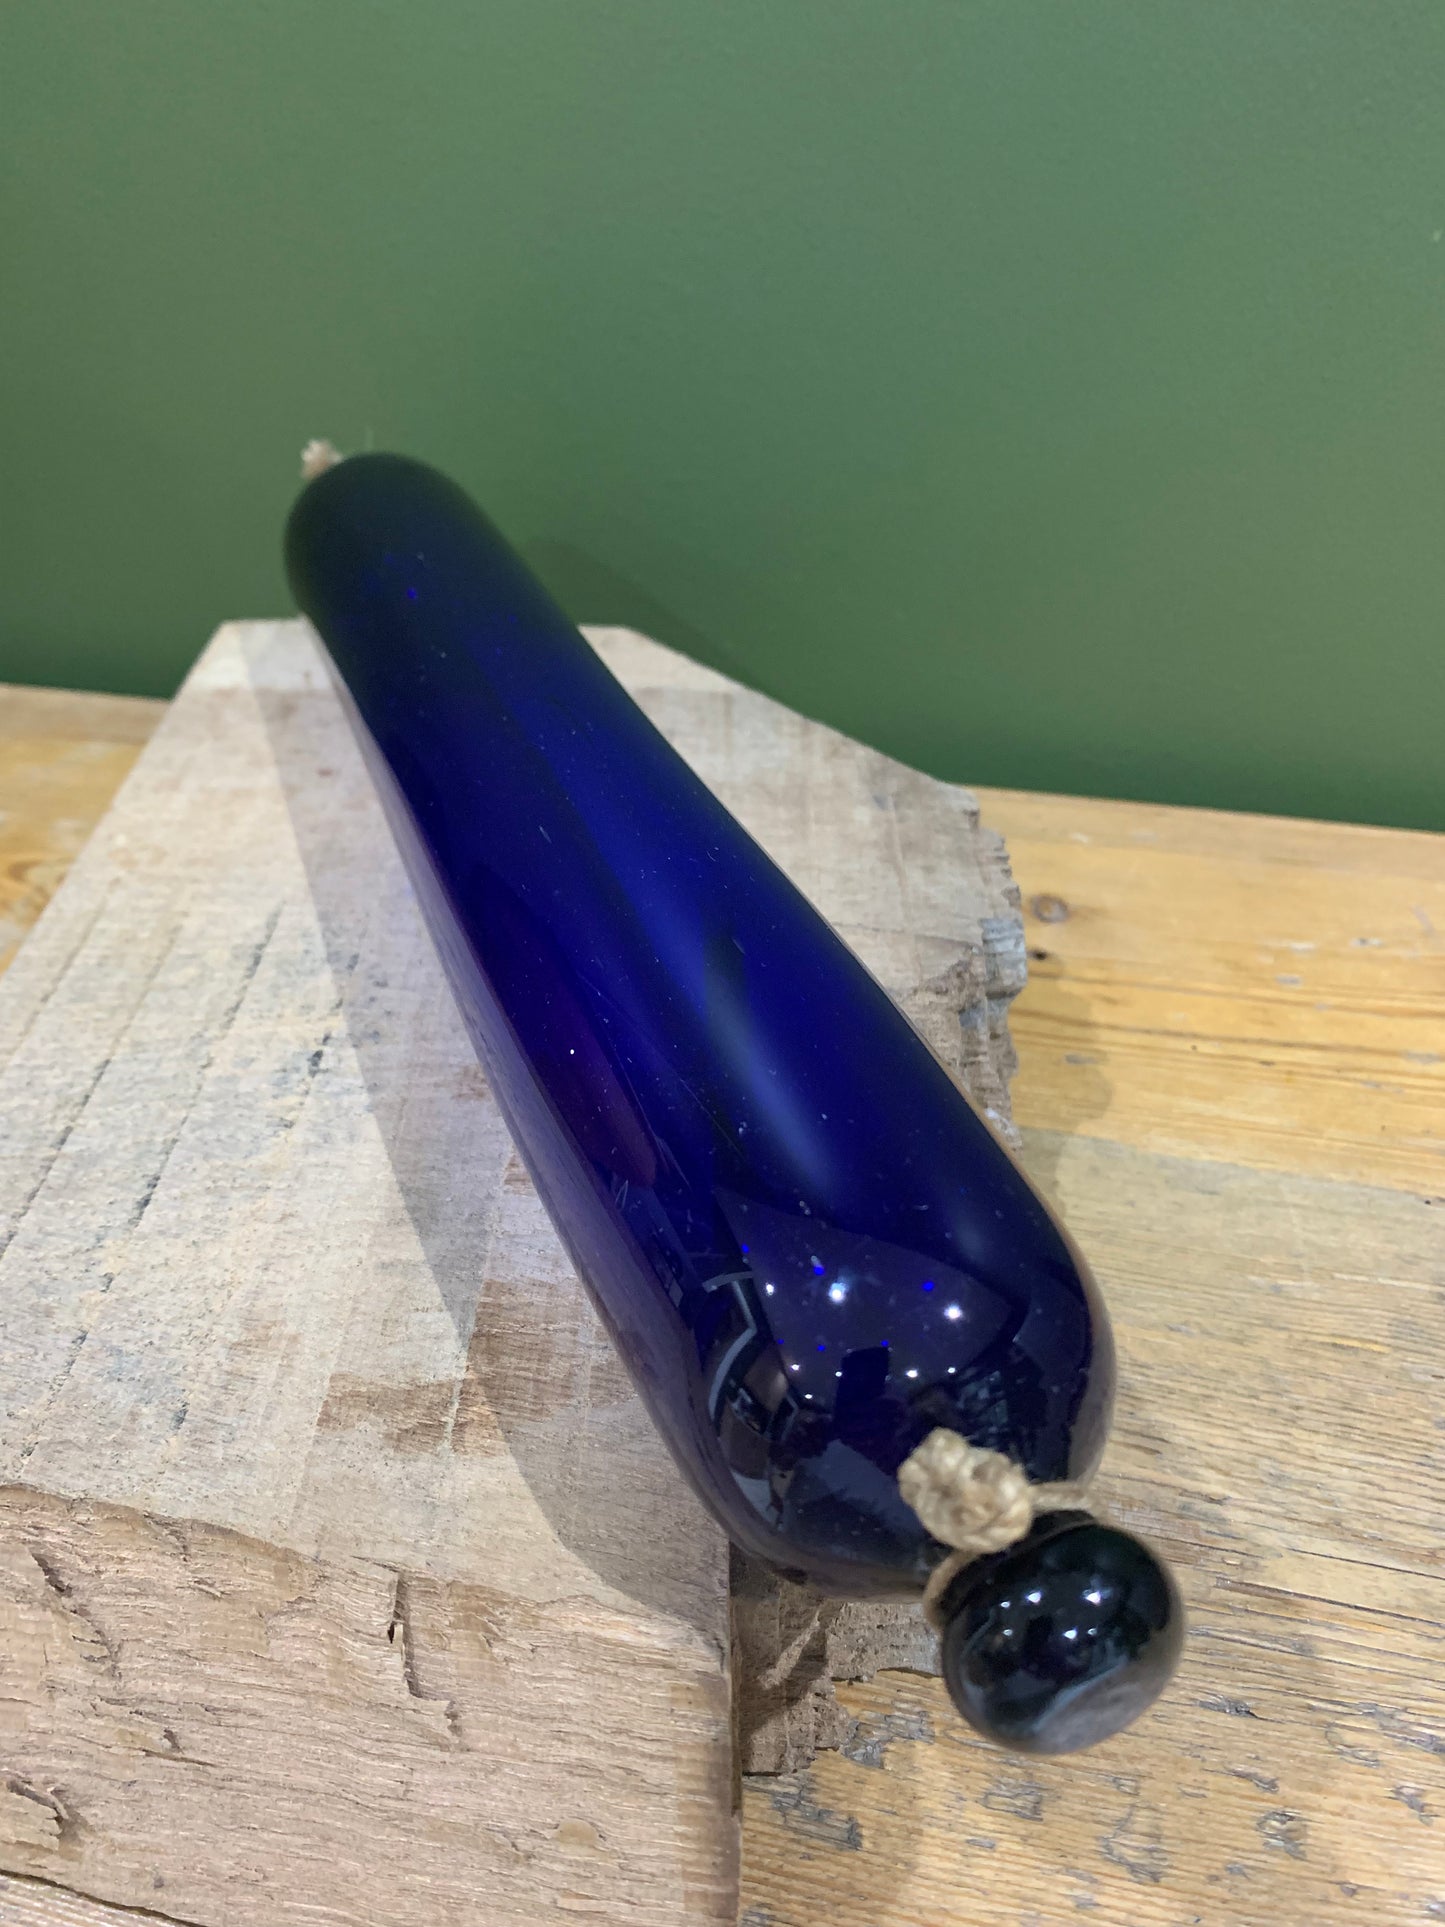 Preserving Victorian Heritage: The Blue Glass Rolling Pin